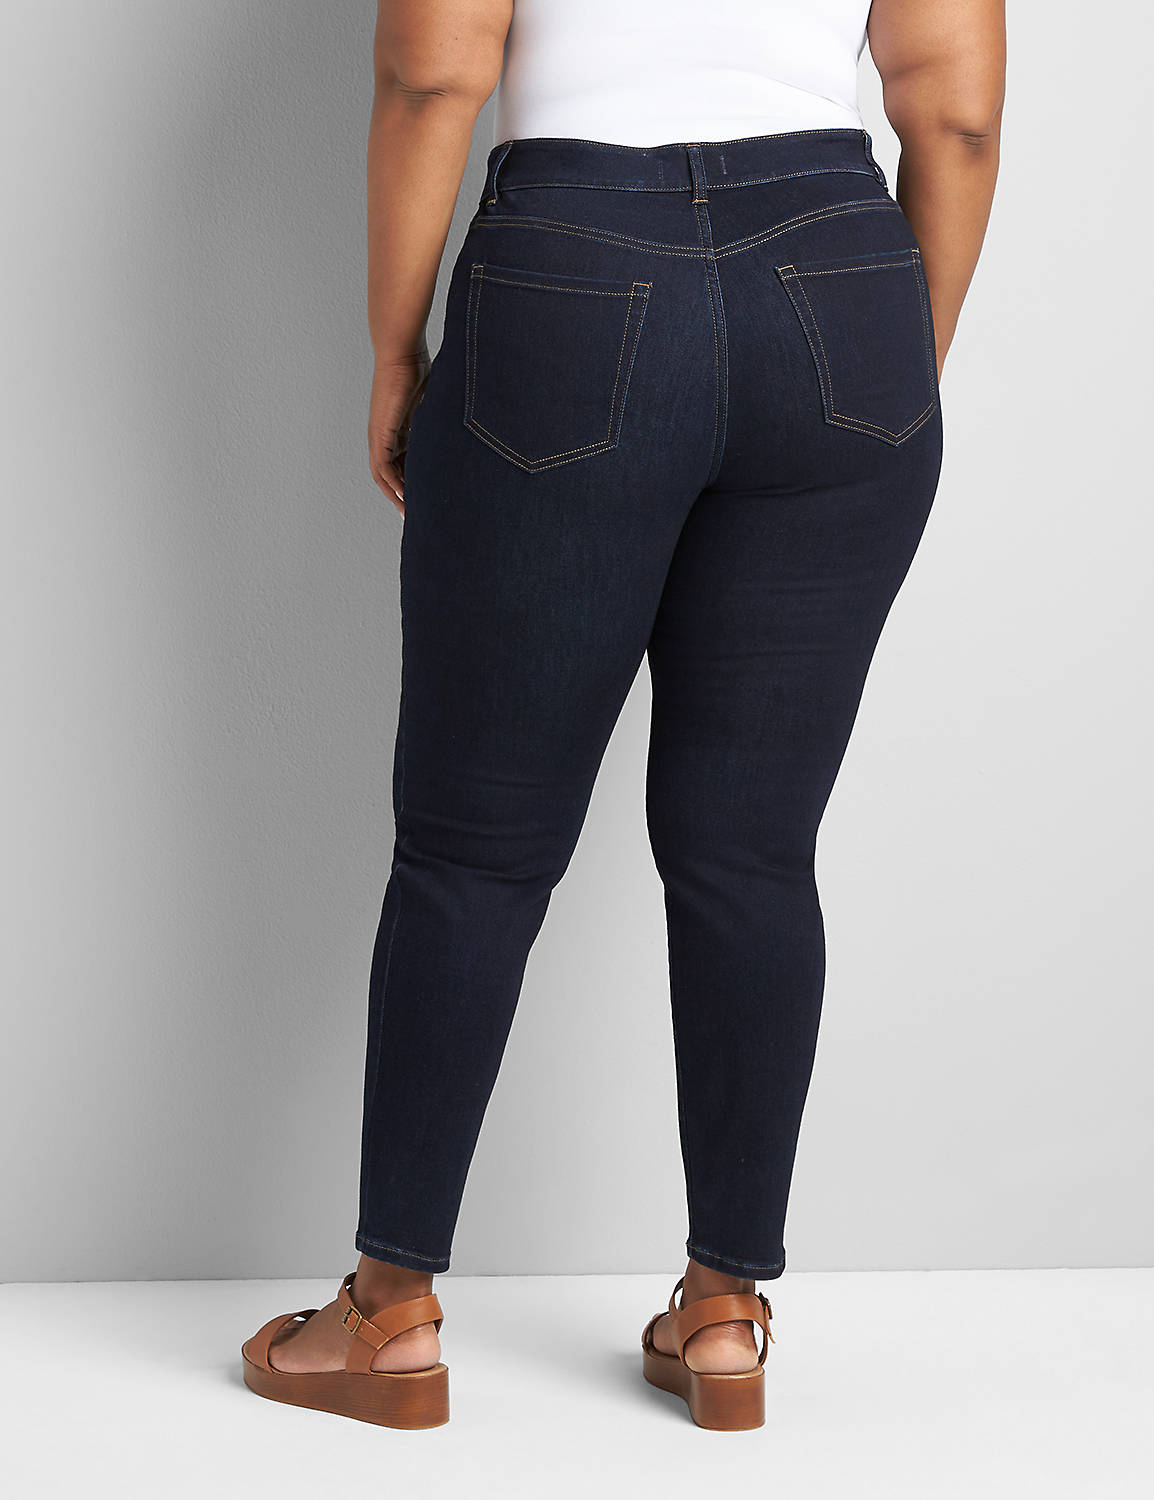 Curvy Fit High-Rise Skinny Jean- Dark Wash Product Image 2